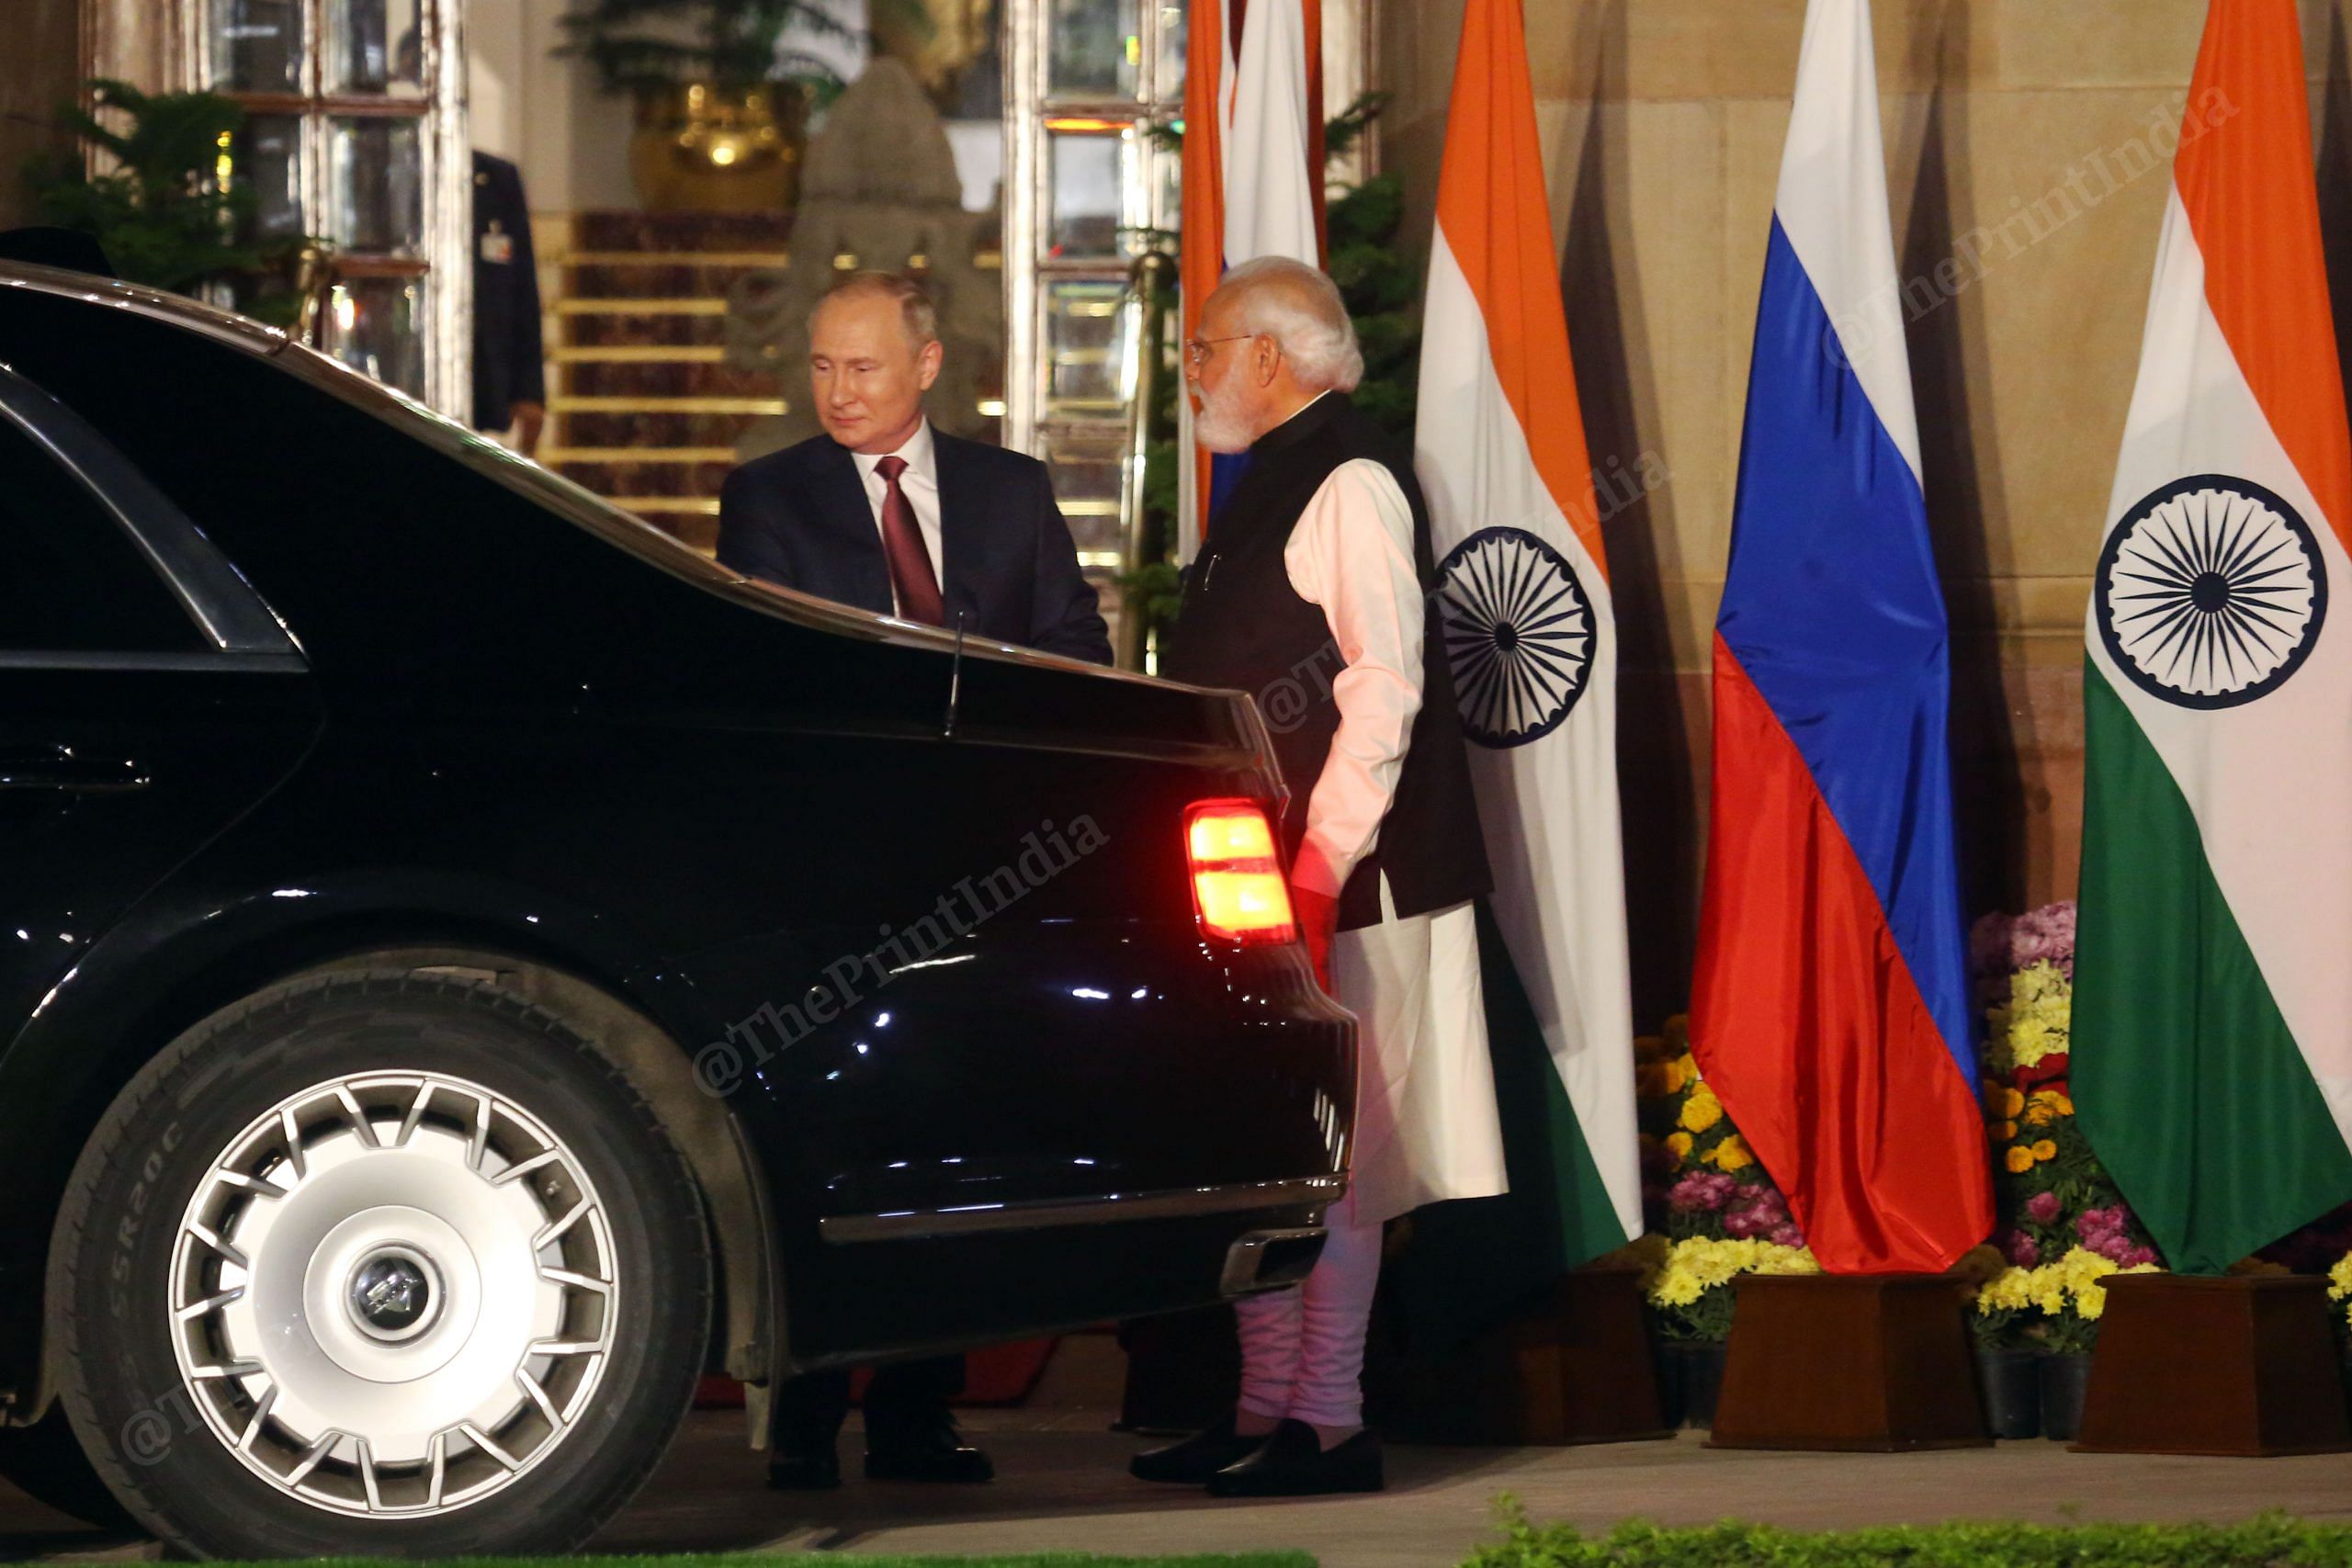 The two leaders greet each other | Photo: Praveen Jain | ThePrint